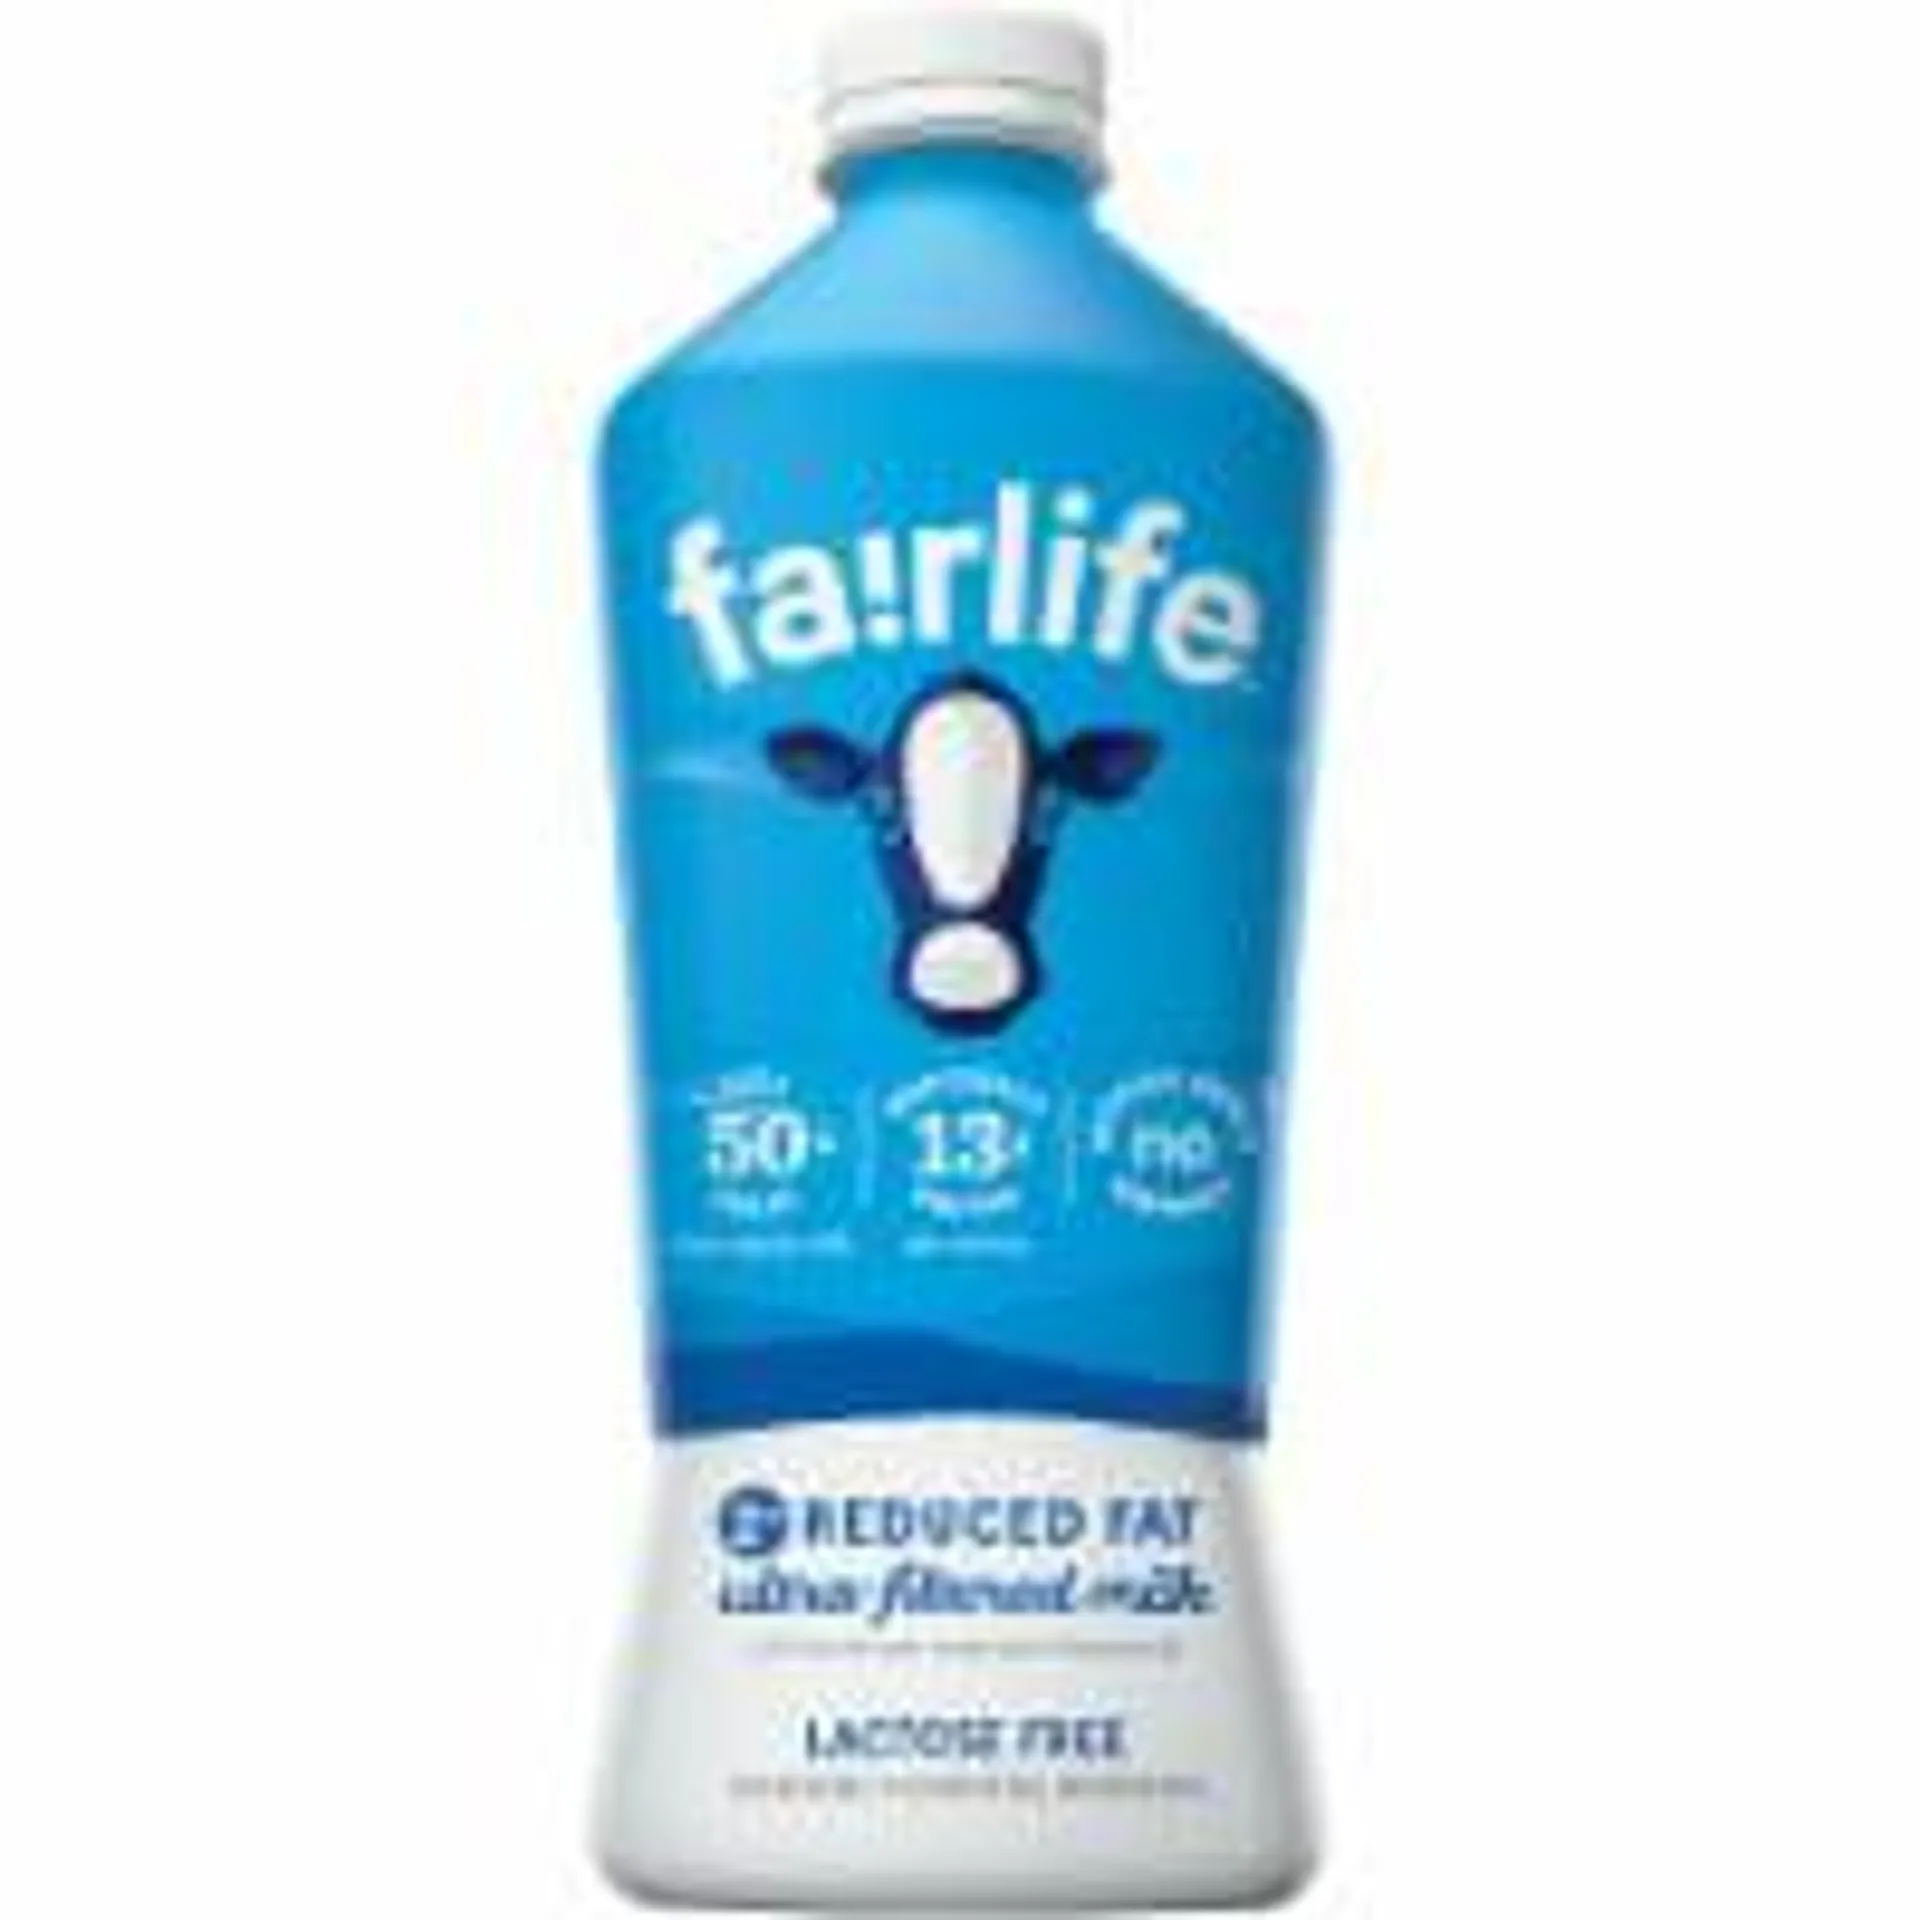 fairlife 2% Reduced Fat Lactose Free & High-Protein Ultra-Filtered Milk